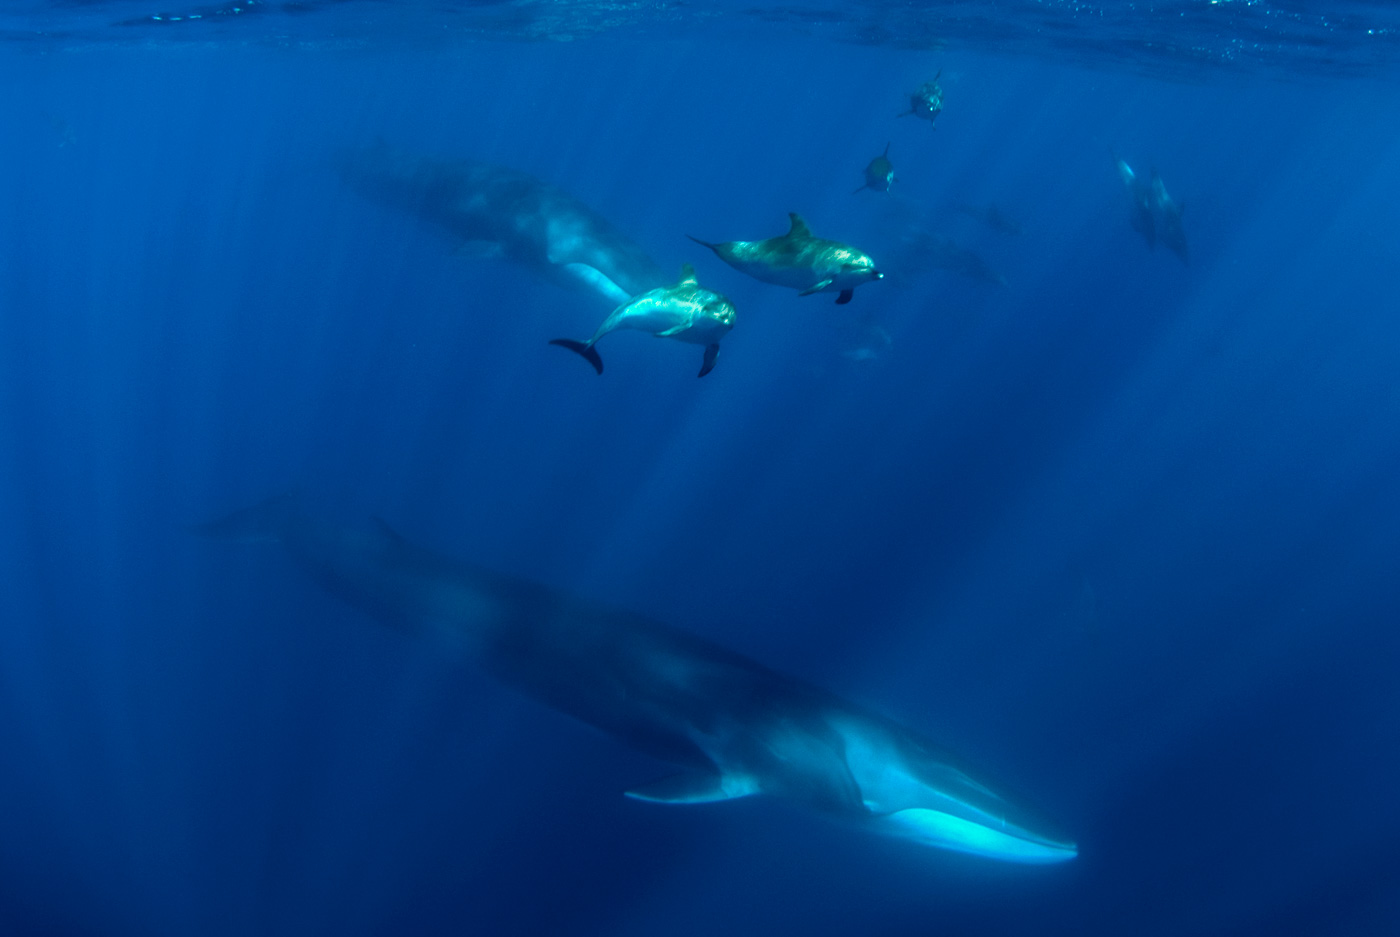 fin whale underwater with spotted dolphins azores | George Karbus ...
